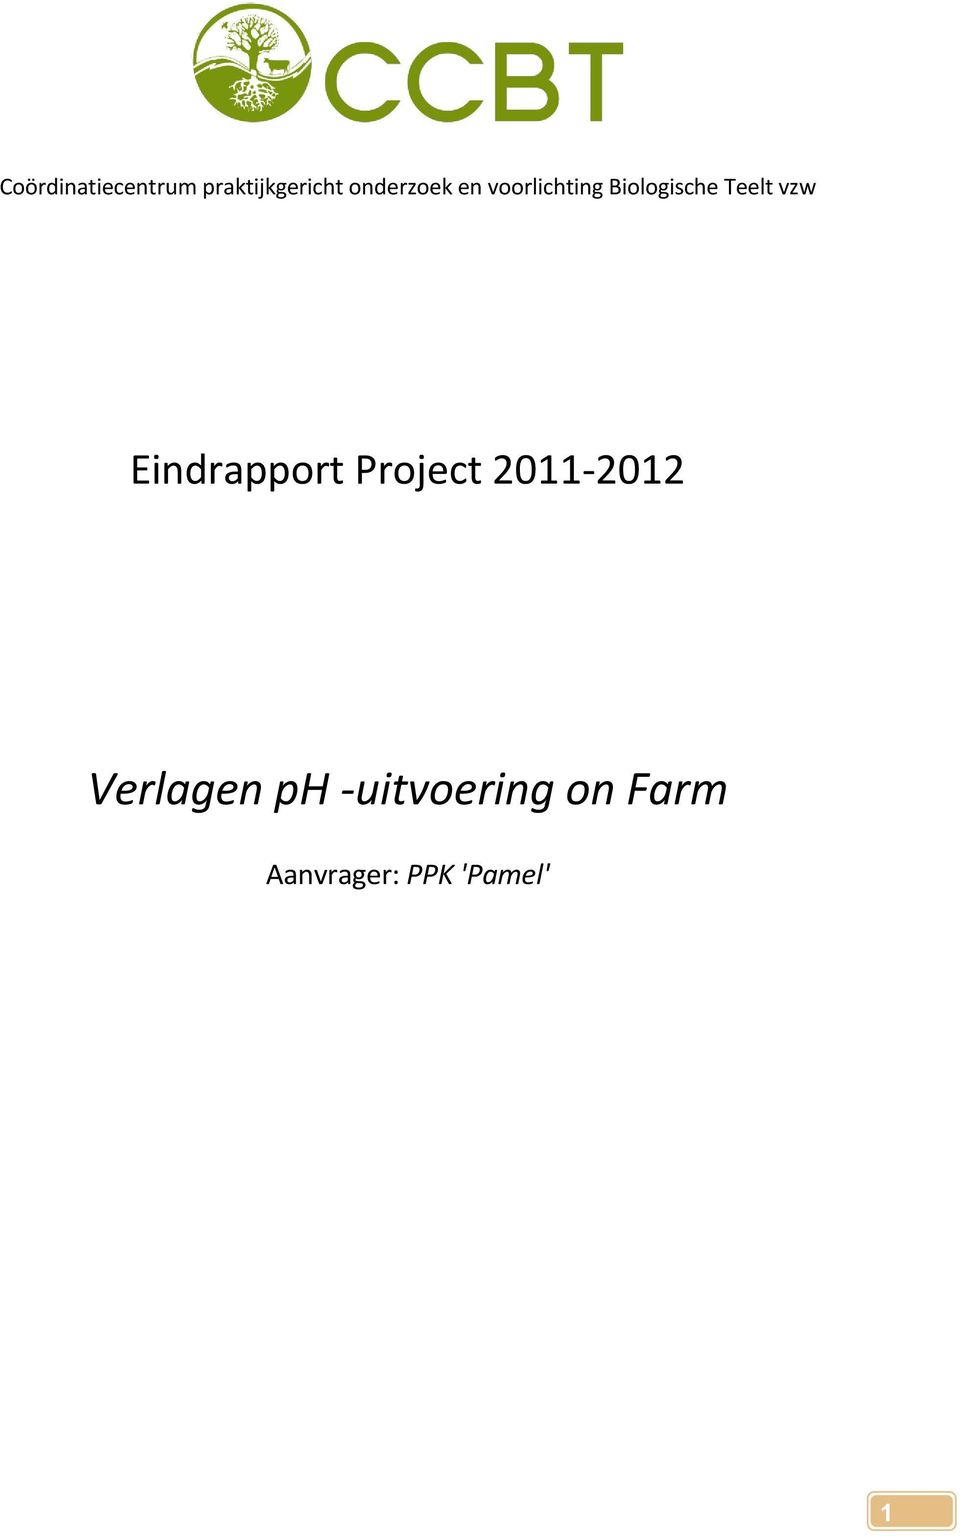 Teelt vzw Eindrapport Project 2011-2012